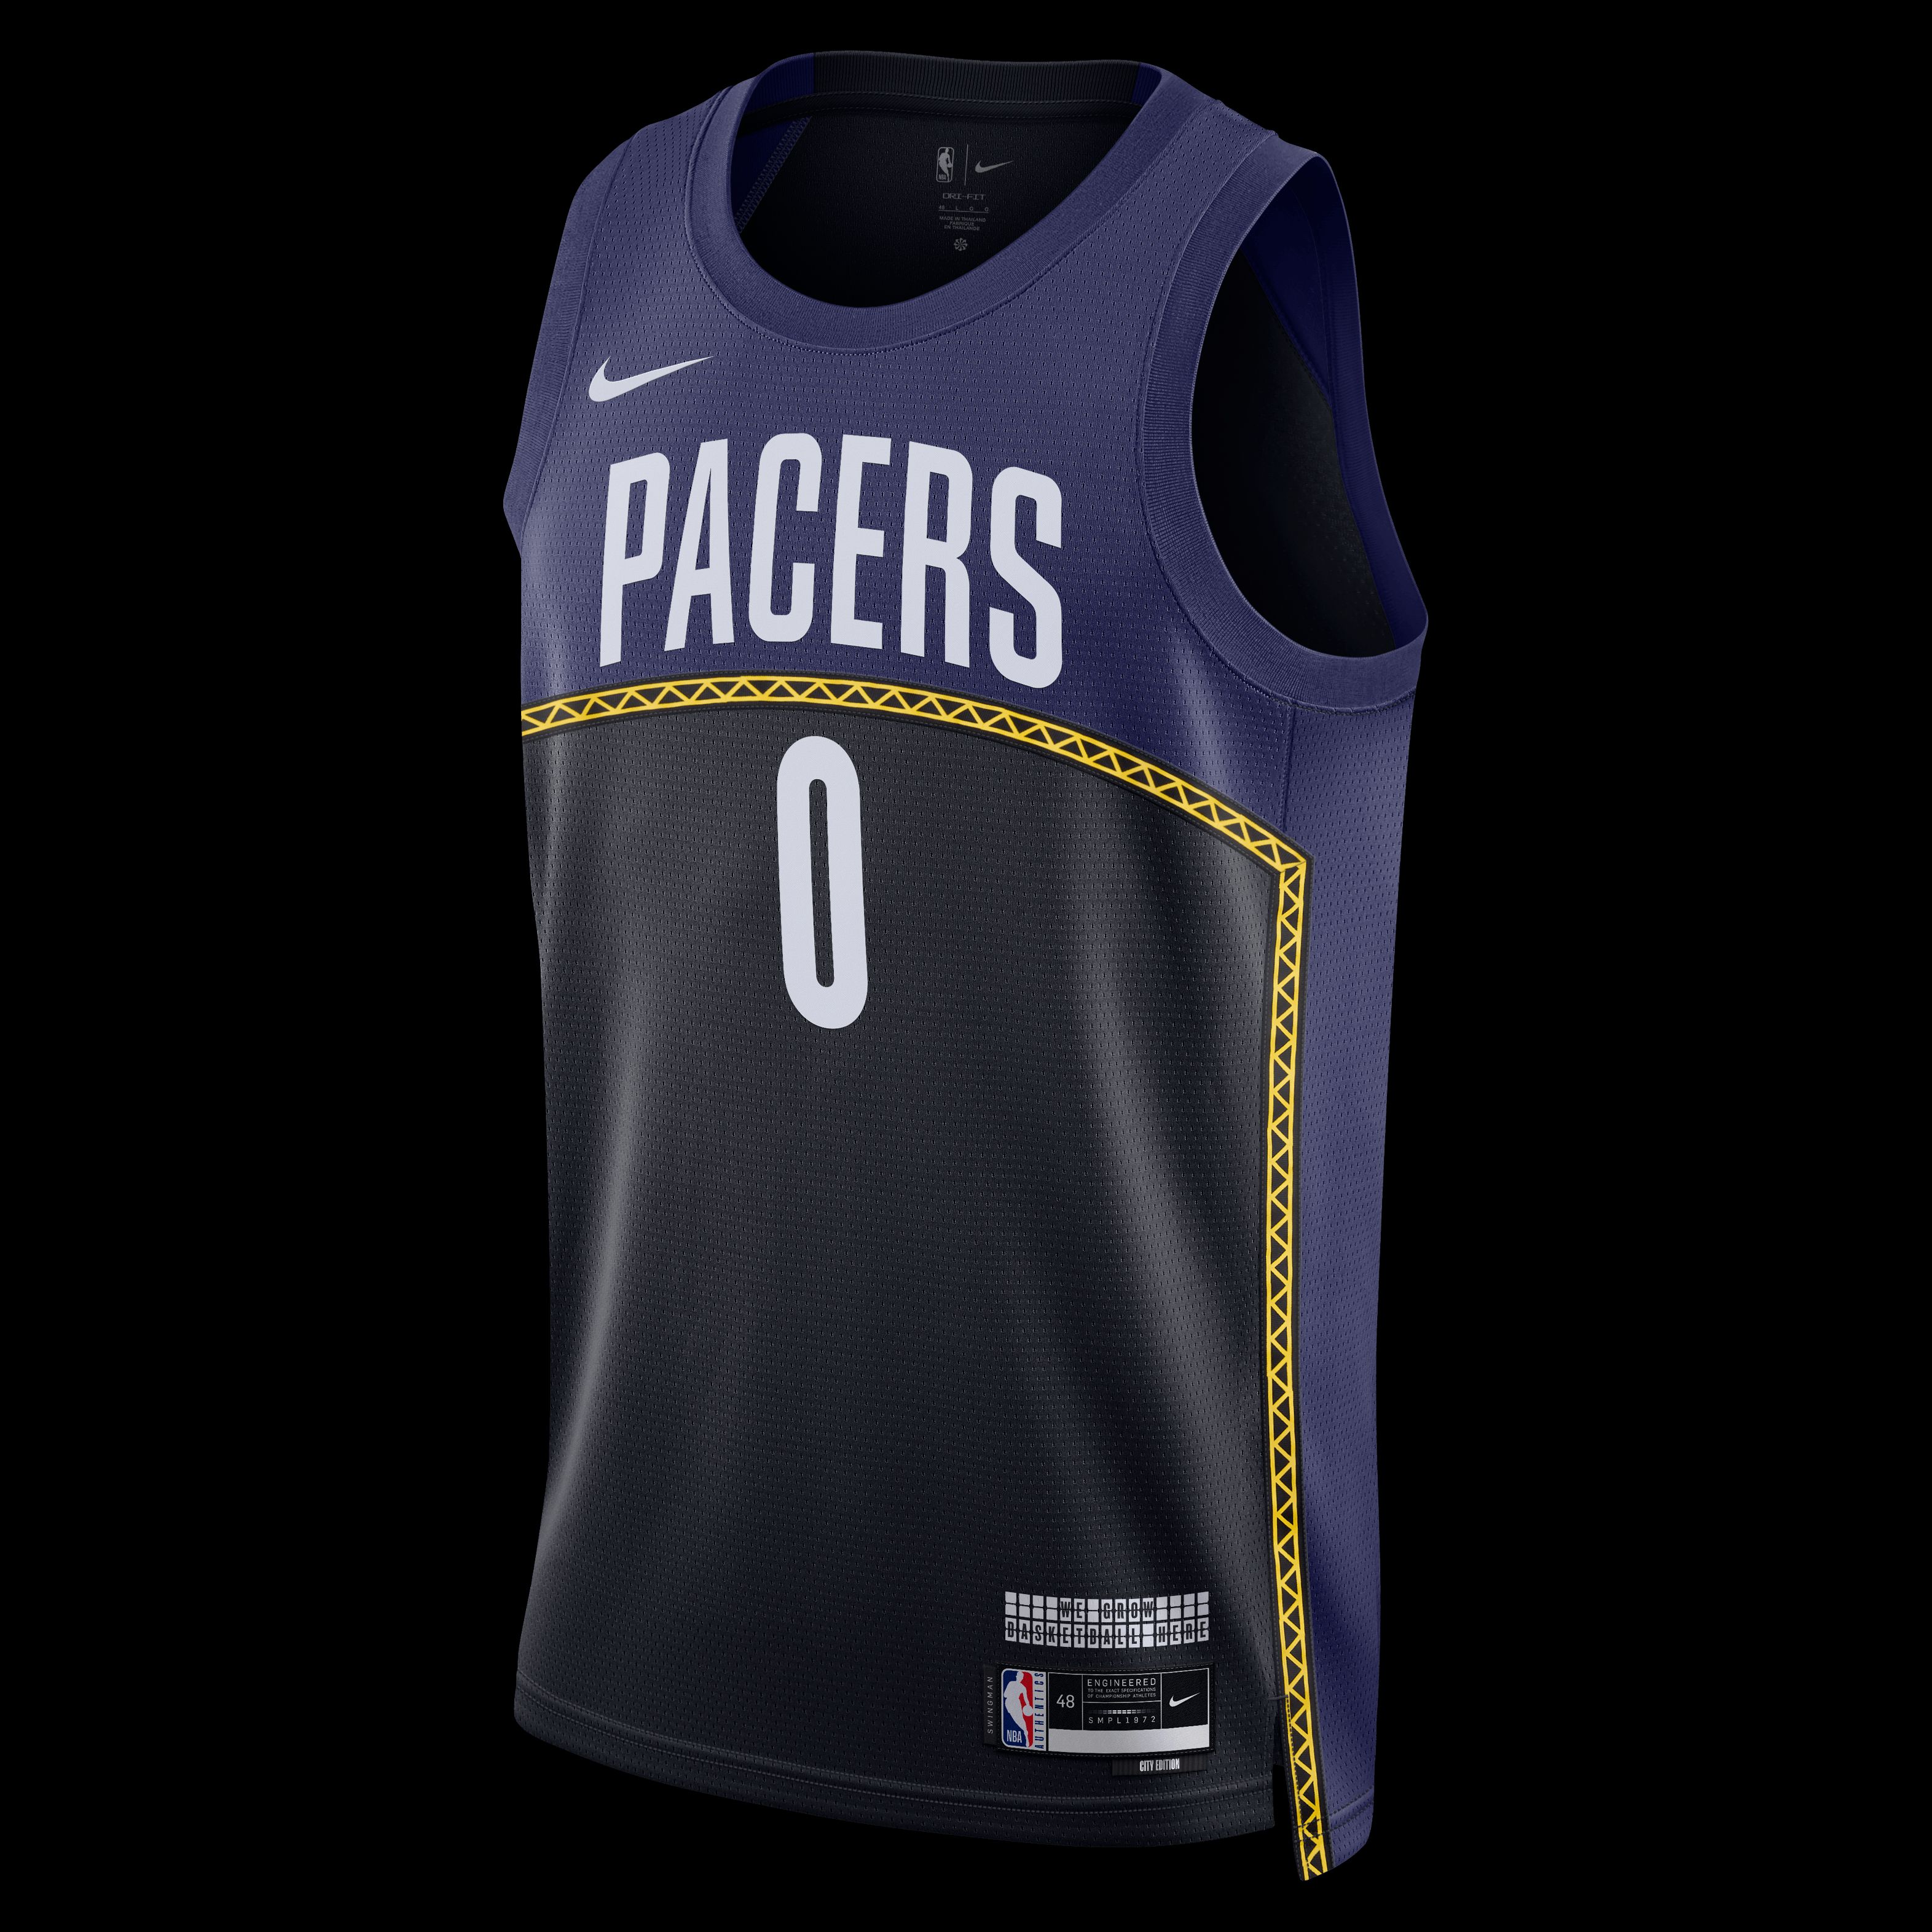 Indiana Pacers unveil new Nike uniform, court, motto